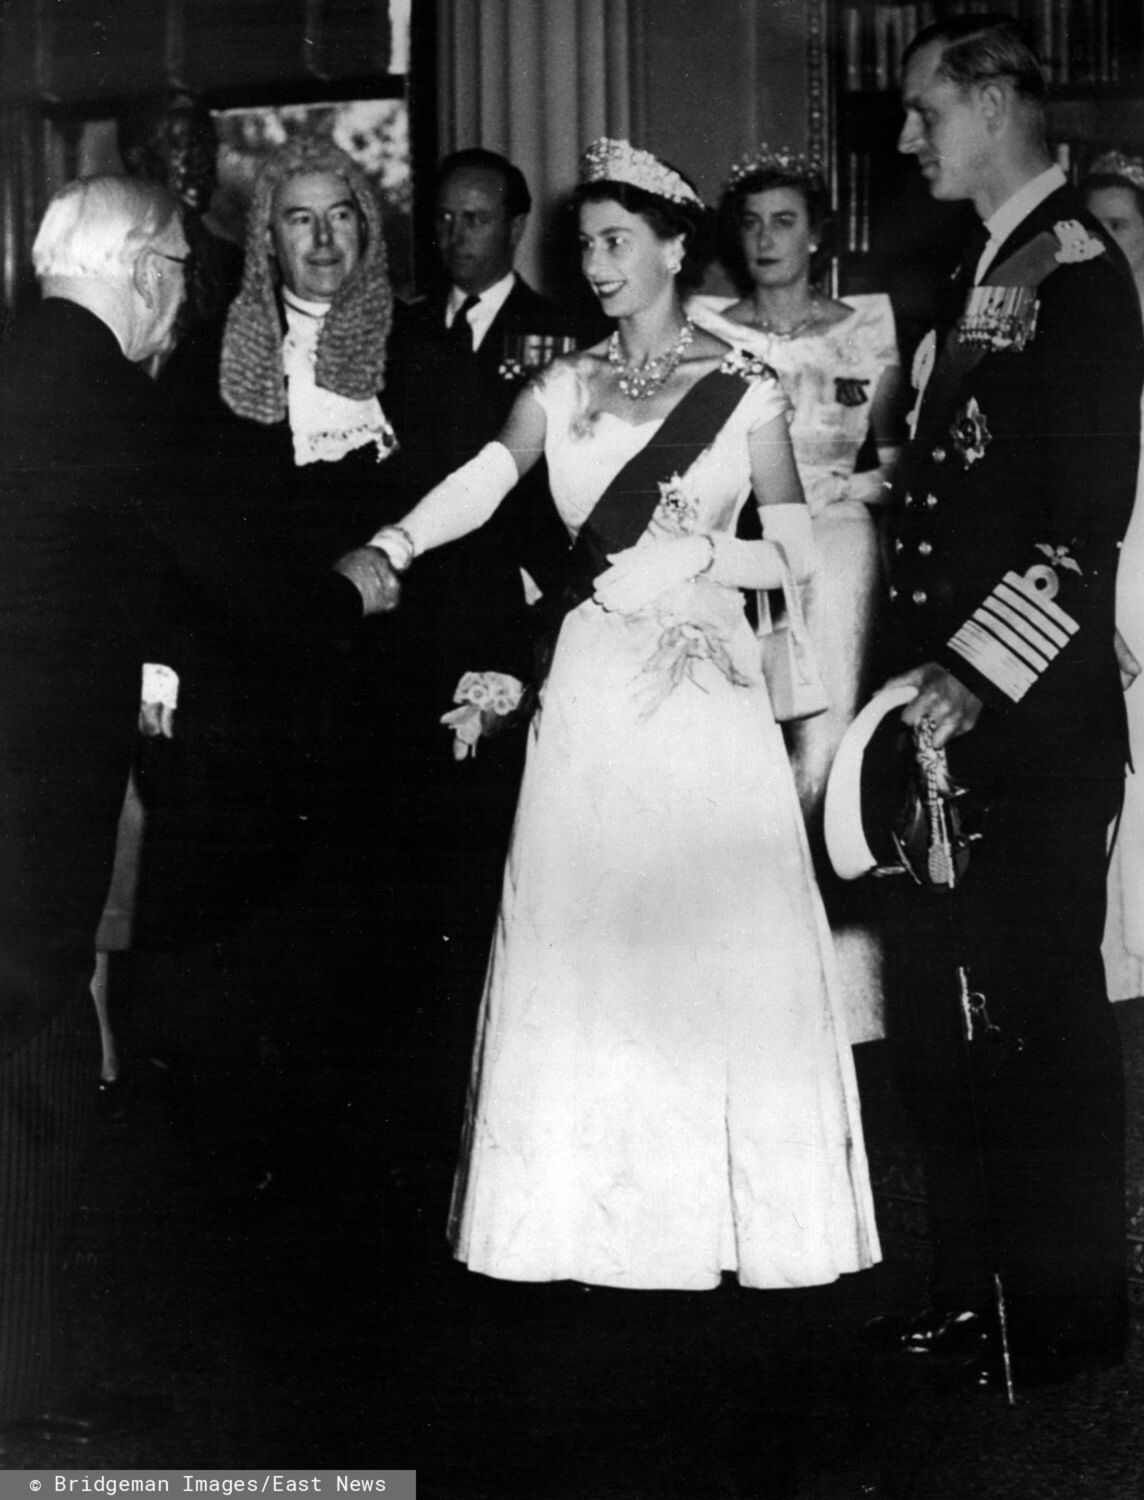 ZUM4920632 Queen Elizabeth (Elisabeth) II - Tue. 03, 1954 - Royal Australian Tour.. Queen Opens Parliament in Melbourne. Keystone Photo Shows: - Councillor H.B. McLeod being presented to the Queen at Parliament House, Melbourne, after the Opening of Parliament Ceremonies.. In background wearing wig is President of the Legislative Council Sir Clifden Eager by .; (add.info.: Queen Elizabeth (Elisabeth) II - Tue. 03, 1954 - Royal Australian Tour.. Queen Opens Parliament in Melbourne. Keystone Photo Shows: - Councillor H.B. McLeod being presented to the Queen at Parliament House, Melbourne, after the Opening of Parliament Ceremonies.. In background wearing wig is President of the Legislative Council Sir Clifden Eager); Photo ?? Keystone/Zuma; .